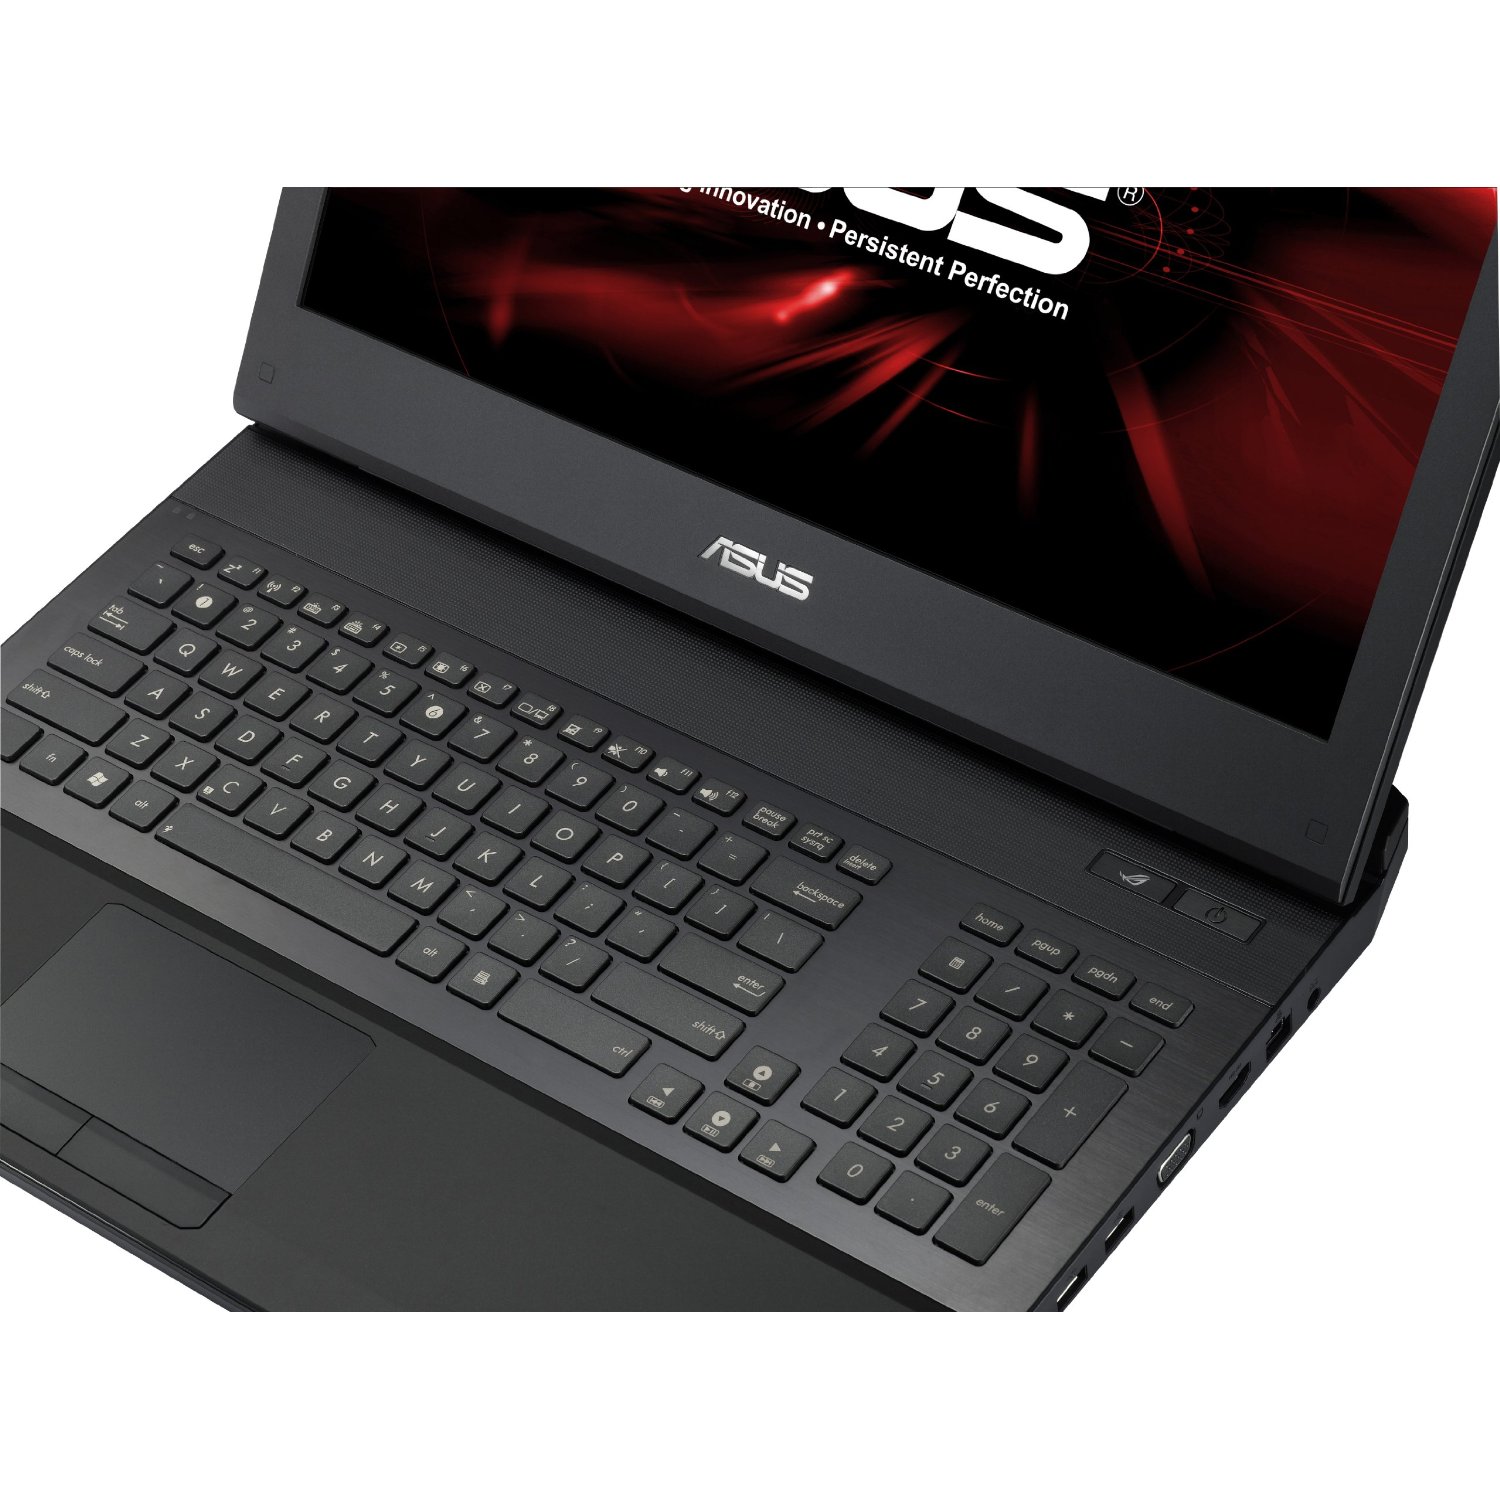 http://thetechjournal.com/wp-content/uploads/images/1205/1338411618-asus-g74sxdh71-full-hd-173inch-led-gaming-laptop-11.jpg